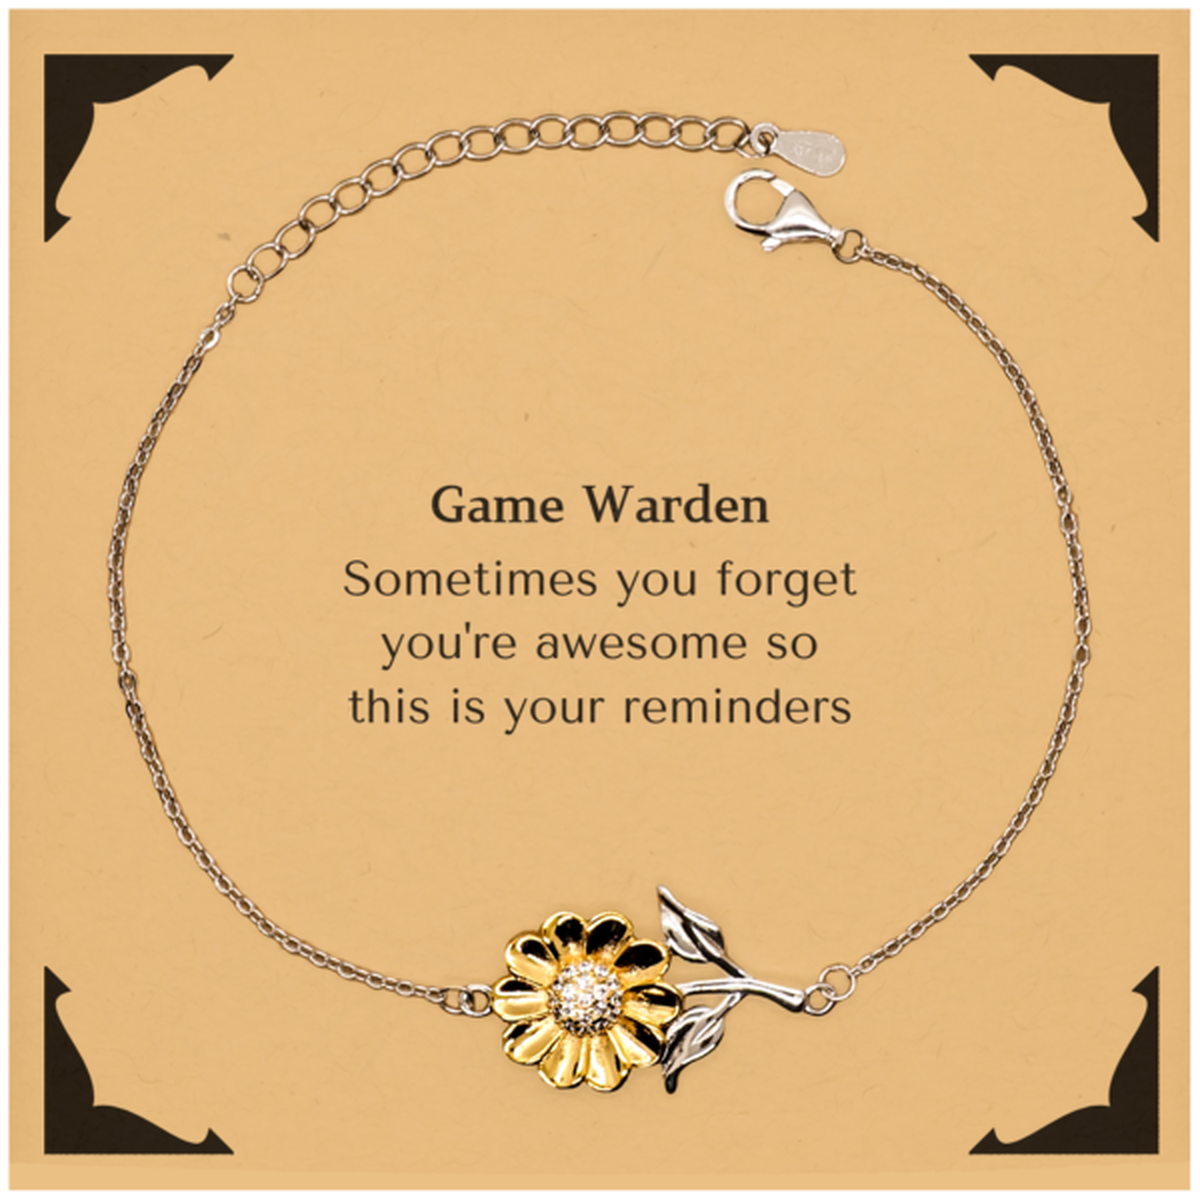 Sentimental Game Warden Sunflower Bracelet, Game Warden Sometimes you forget you're awesome so this is your reminders, Graduation Christmas Birthday Gifts for Game Warden, Men, Women, Coworkers